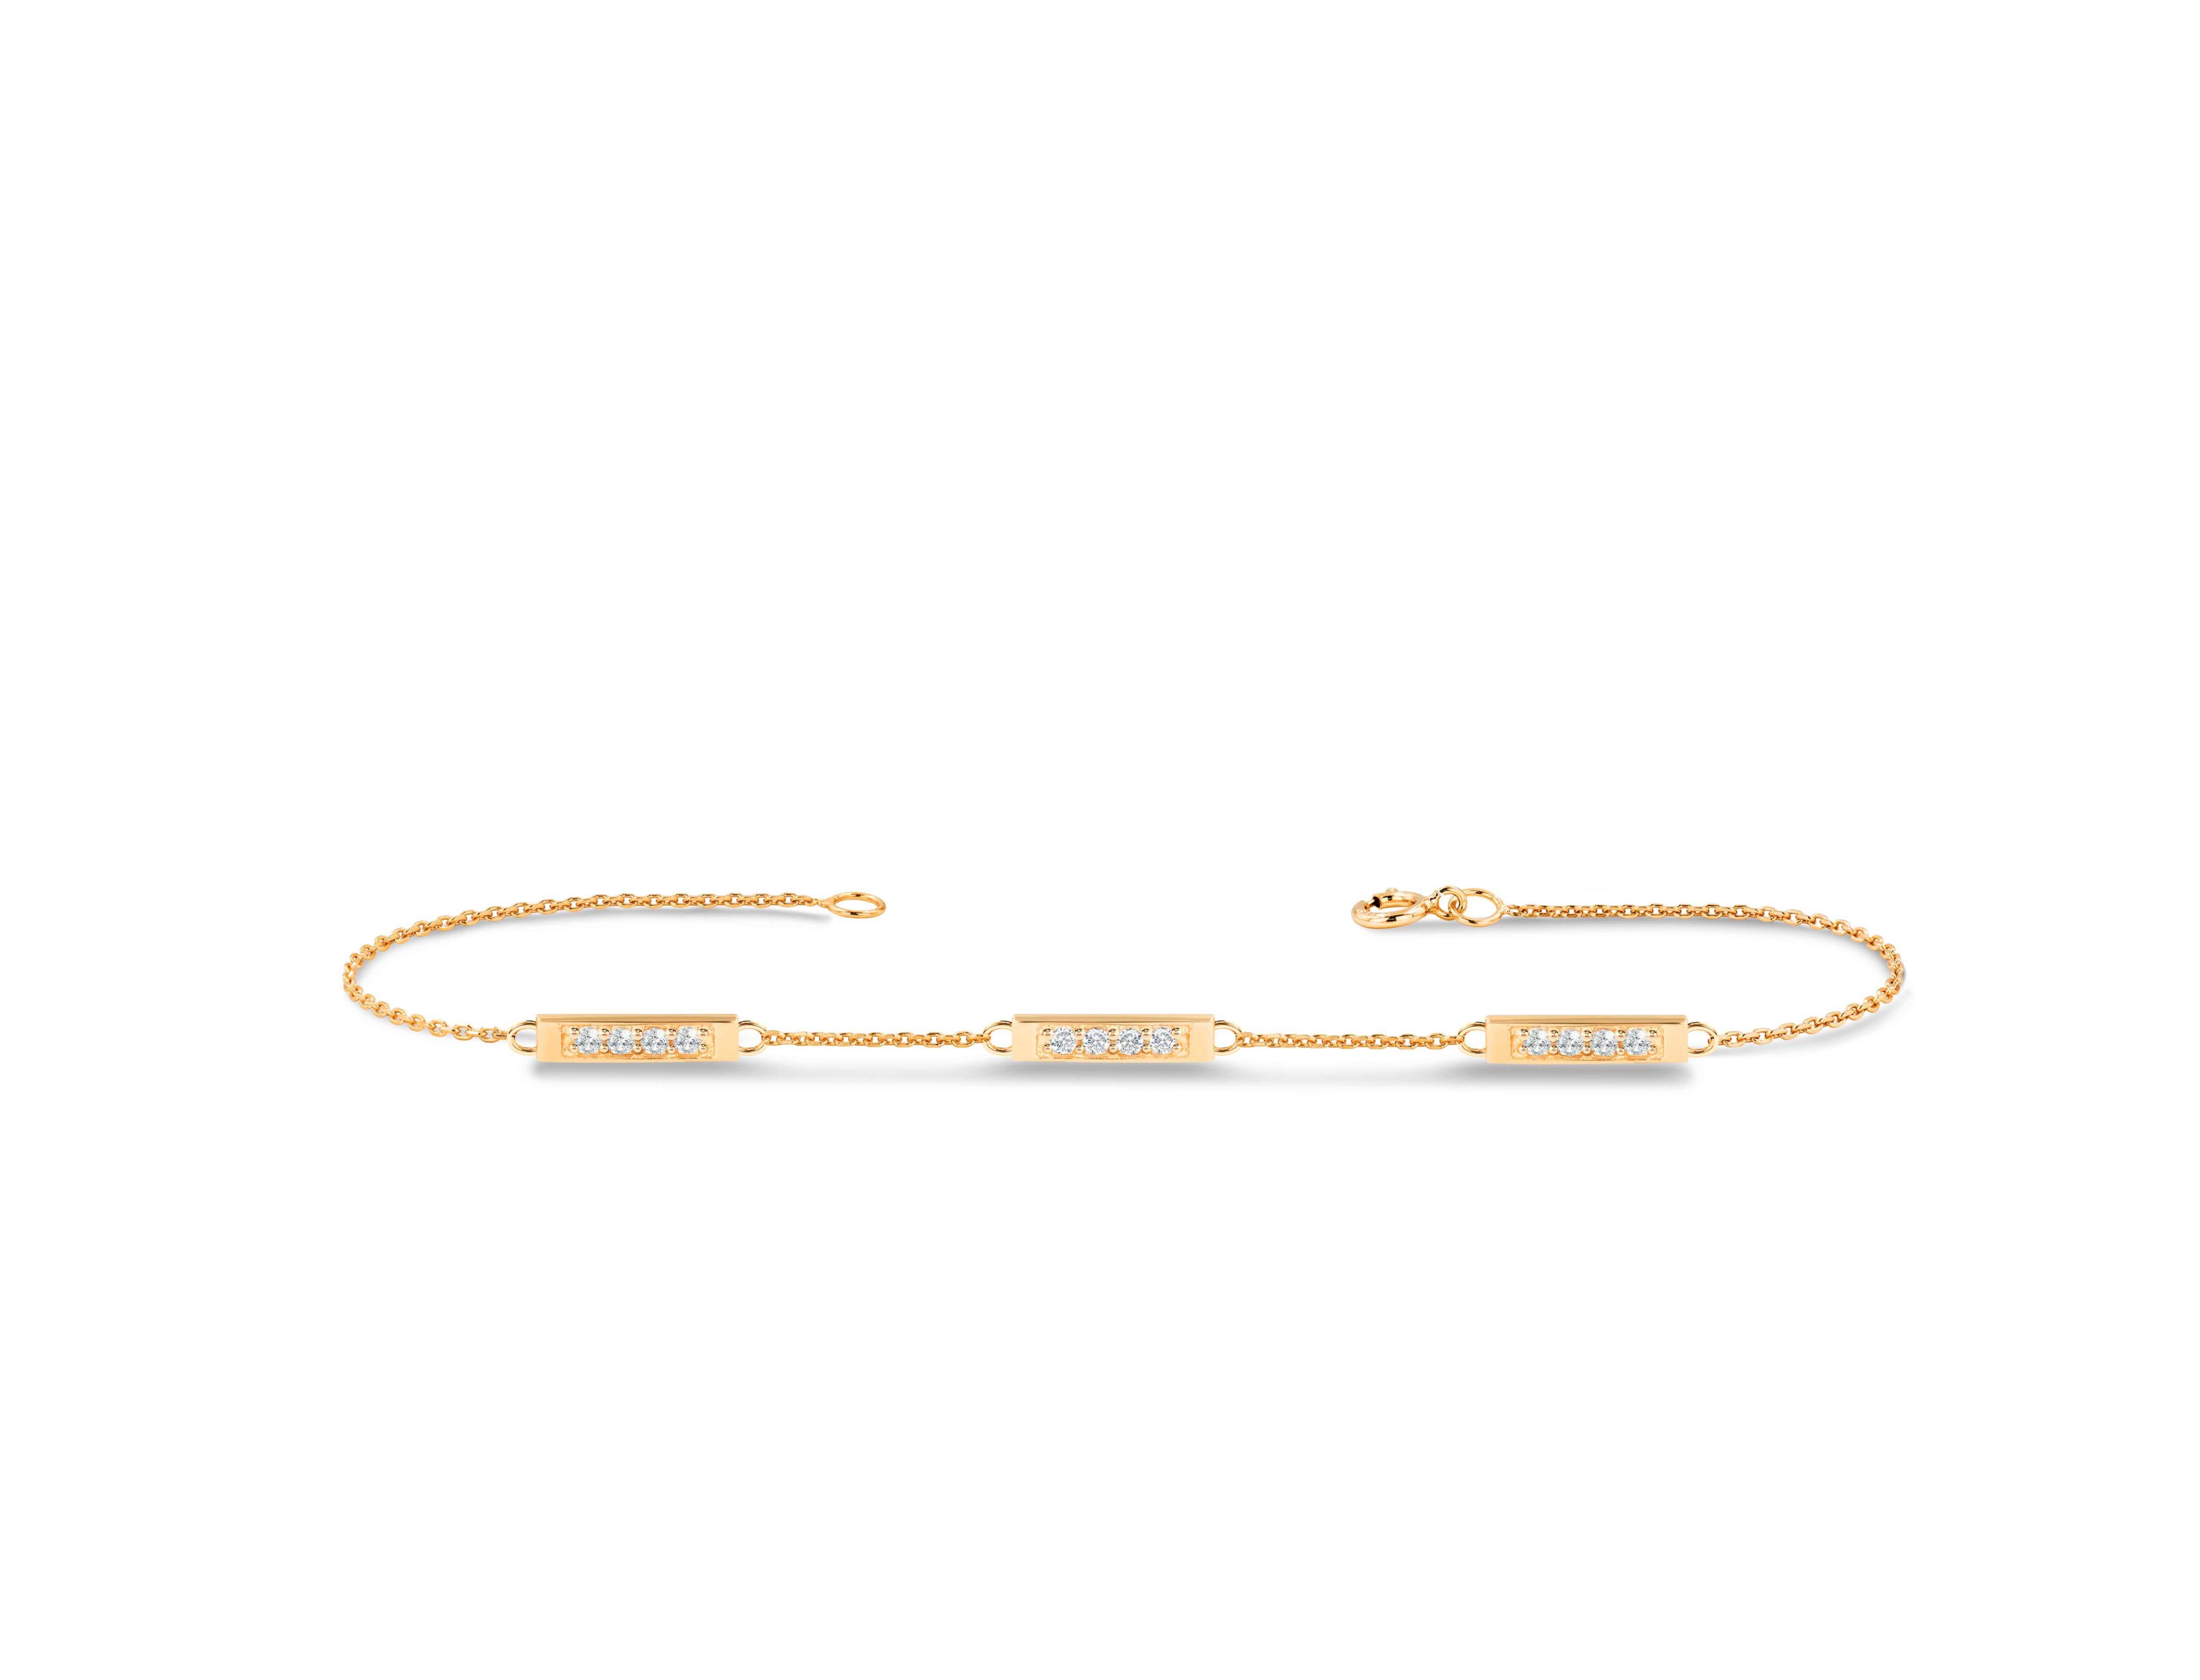 Beautiful and elegant, this Diamond Multi- bar bracelet is the perfect jewelry to layer with your other bracelets made with pure gold and consists of genuine and natural diamonds. This minimalist bracelet gives a sophisticated yet classy look to